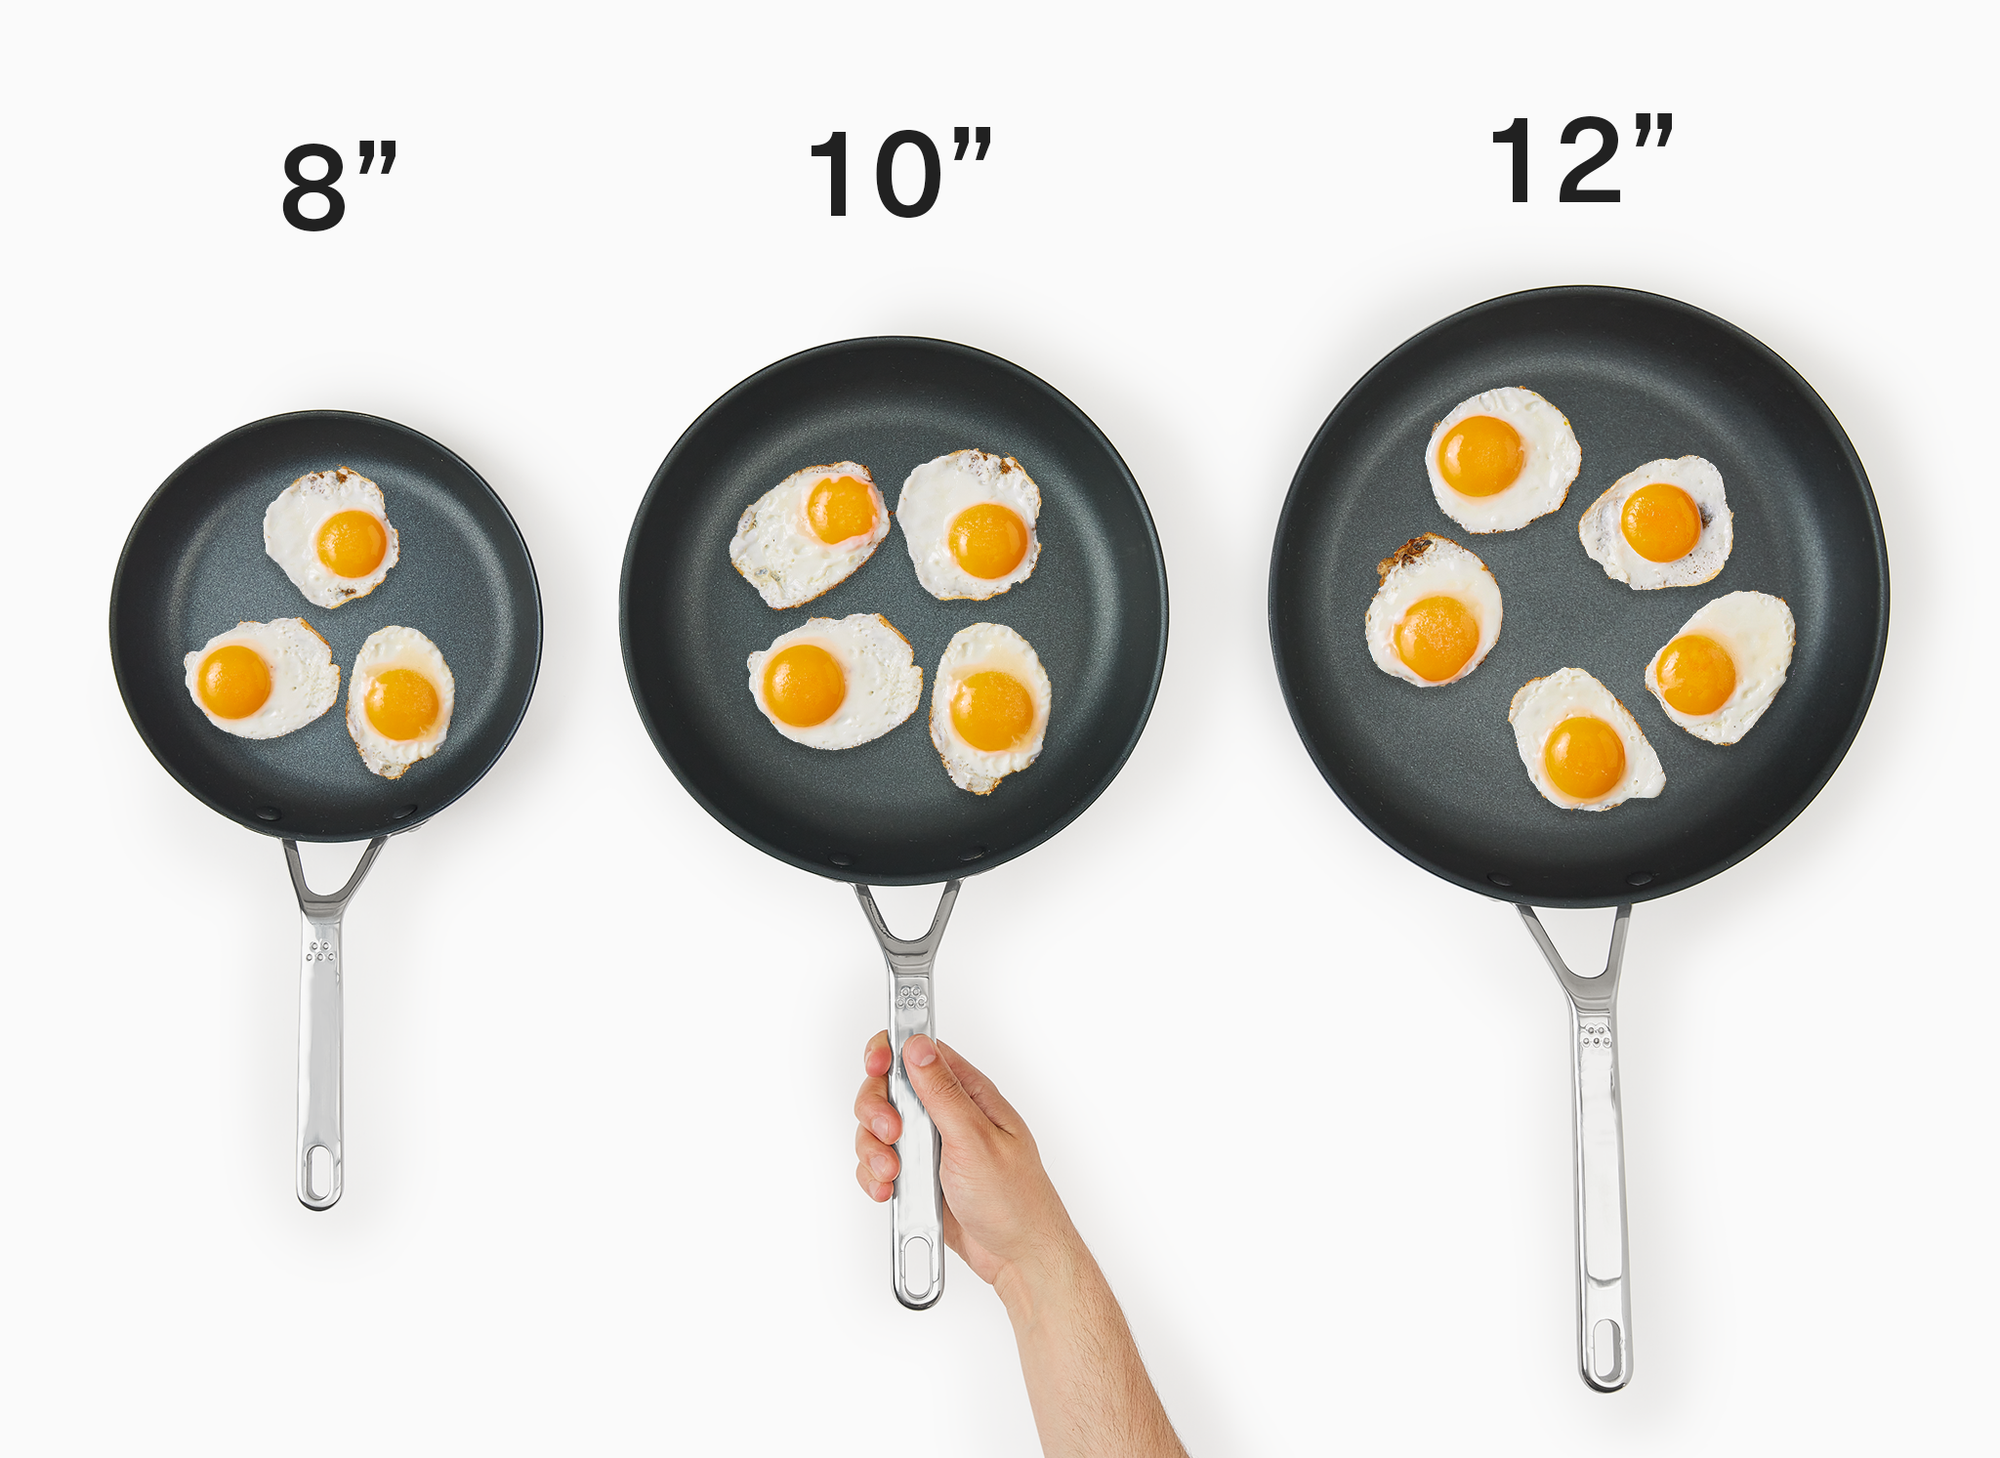 Misen Nonstick Frying Pan Set - 8, 10, 12 Inch Skillets for Cooking Eggs,  Omelettes - Induction Ready, Dishwasher Safe, Non Stick Fry Pans - Saute